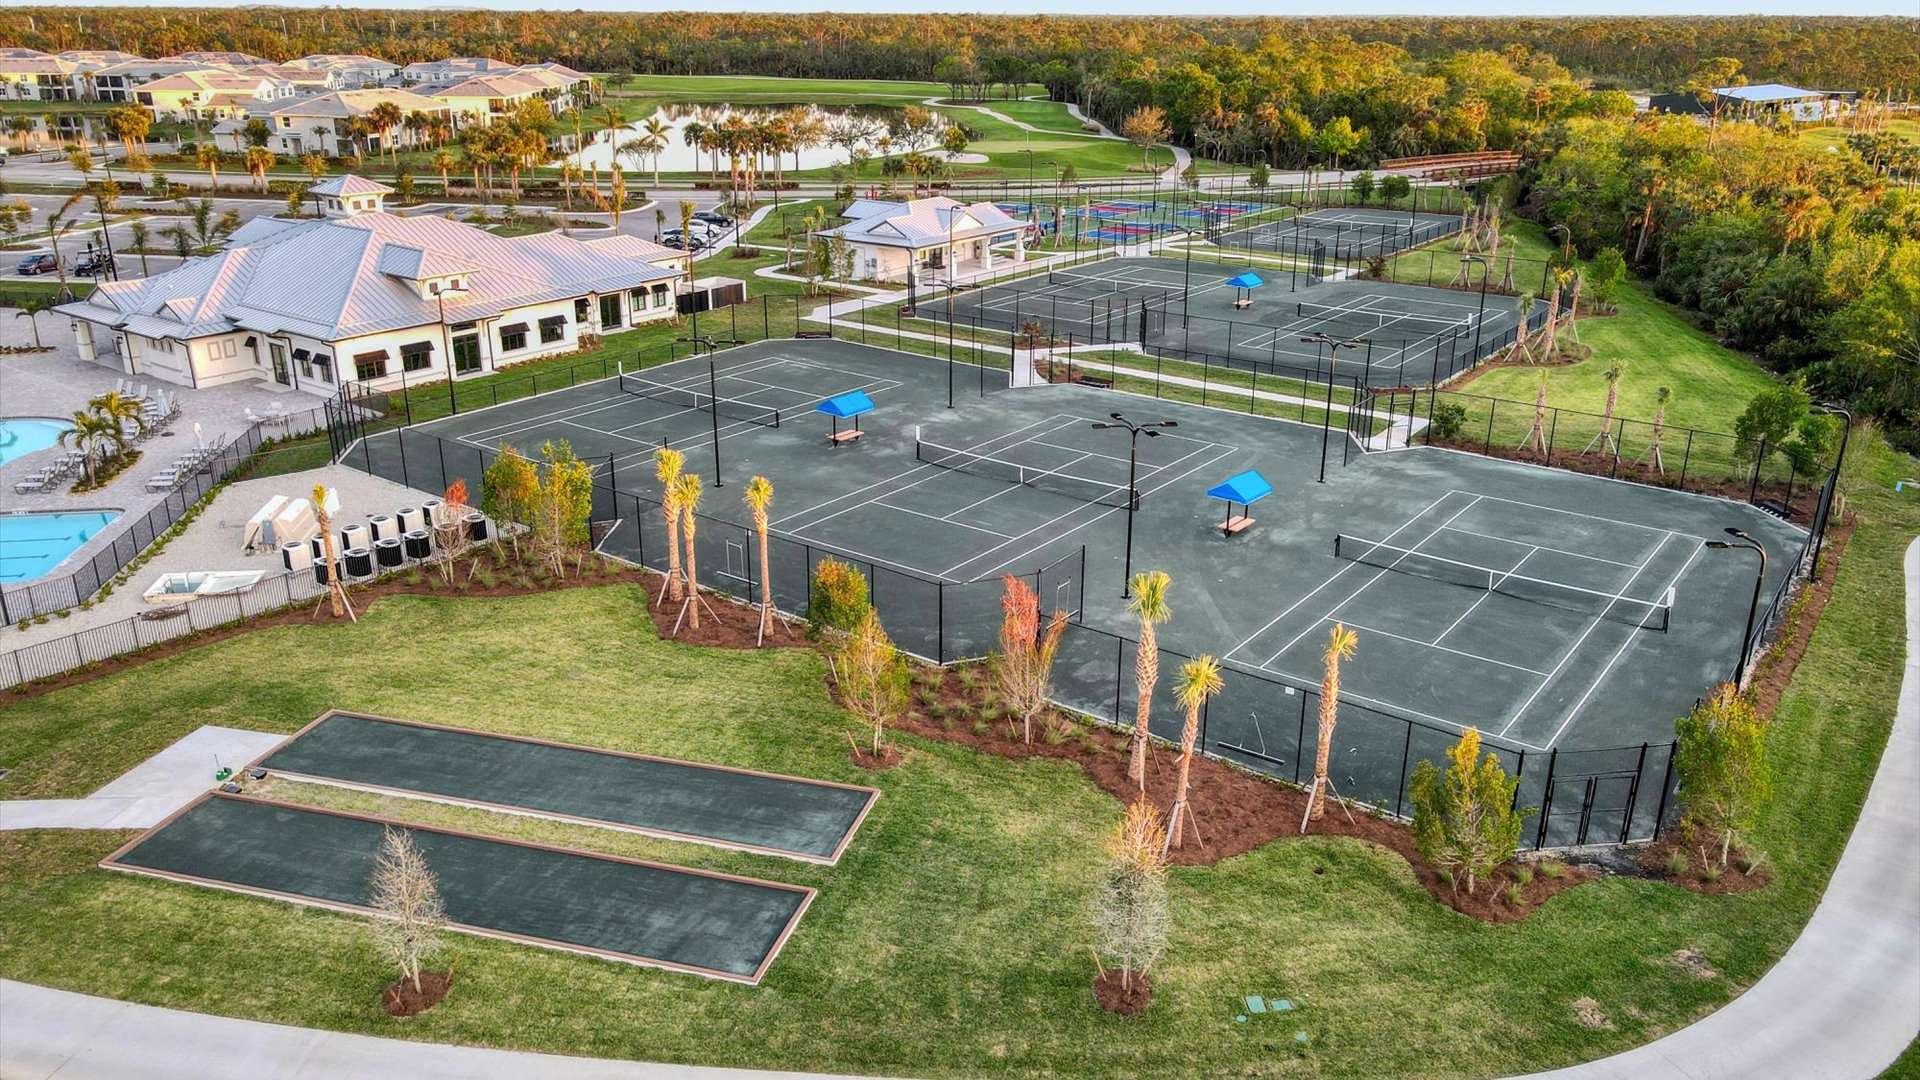 Heritage Landing Tennis, Pickleball, and shuffleboard courts